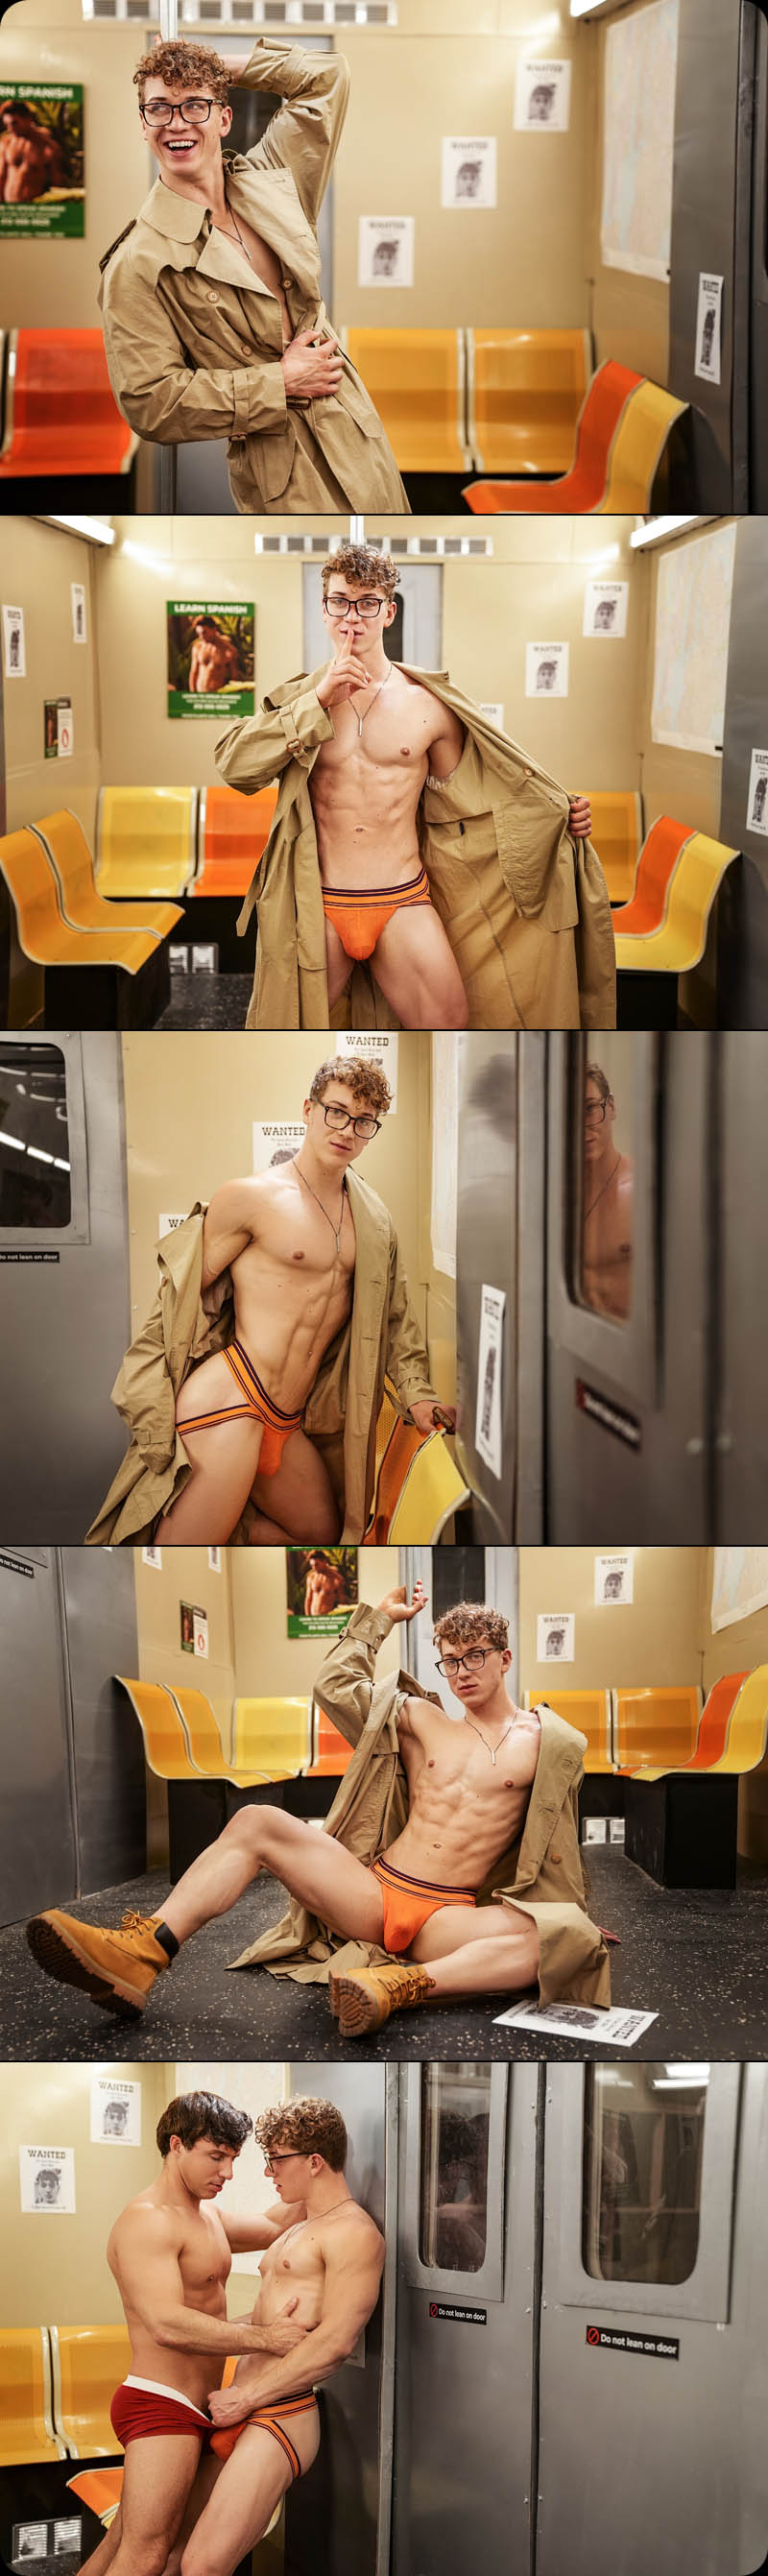 WANTED (Subway Flasher Felix Fox Gets Fucked by Inspector Reese Rideout) at MEN.com